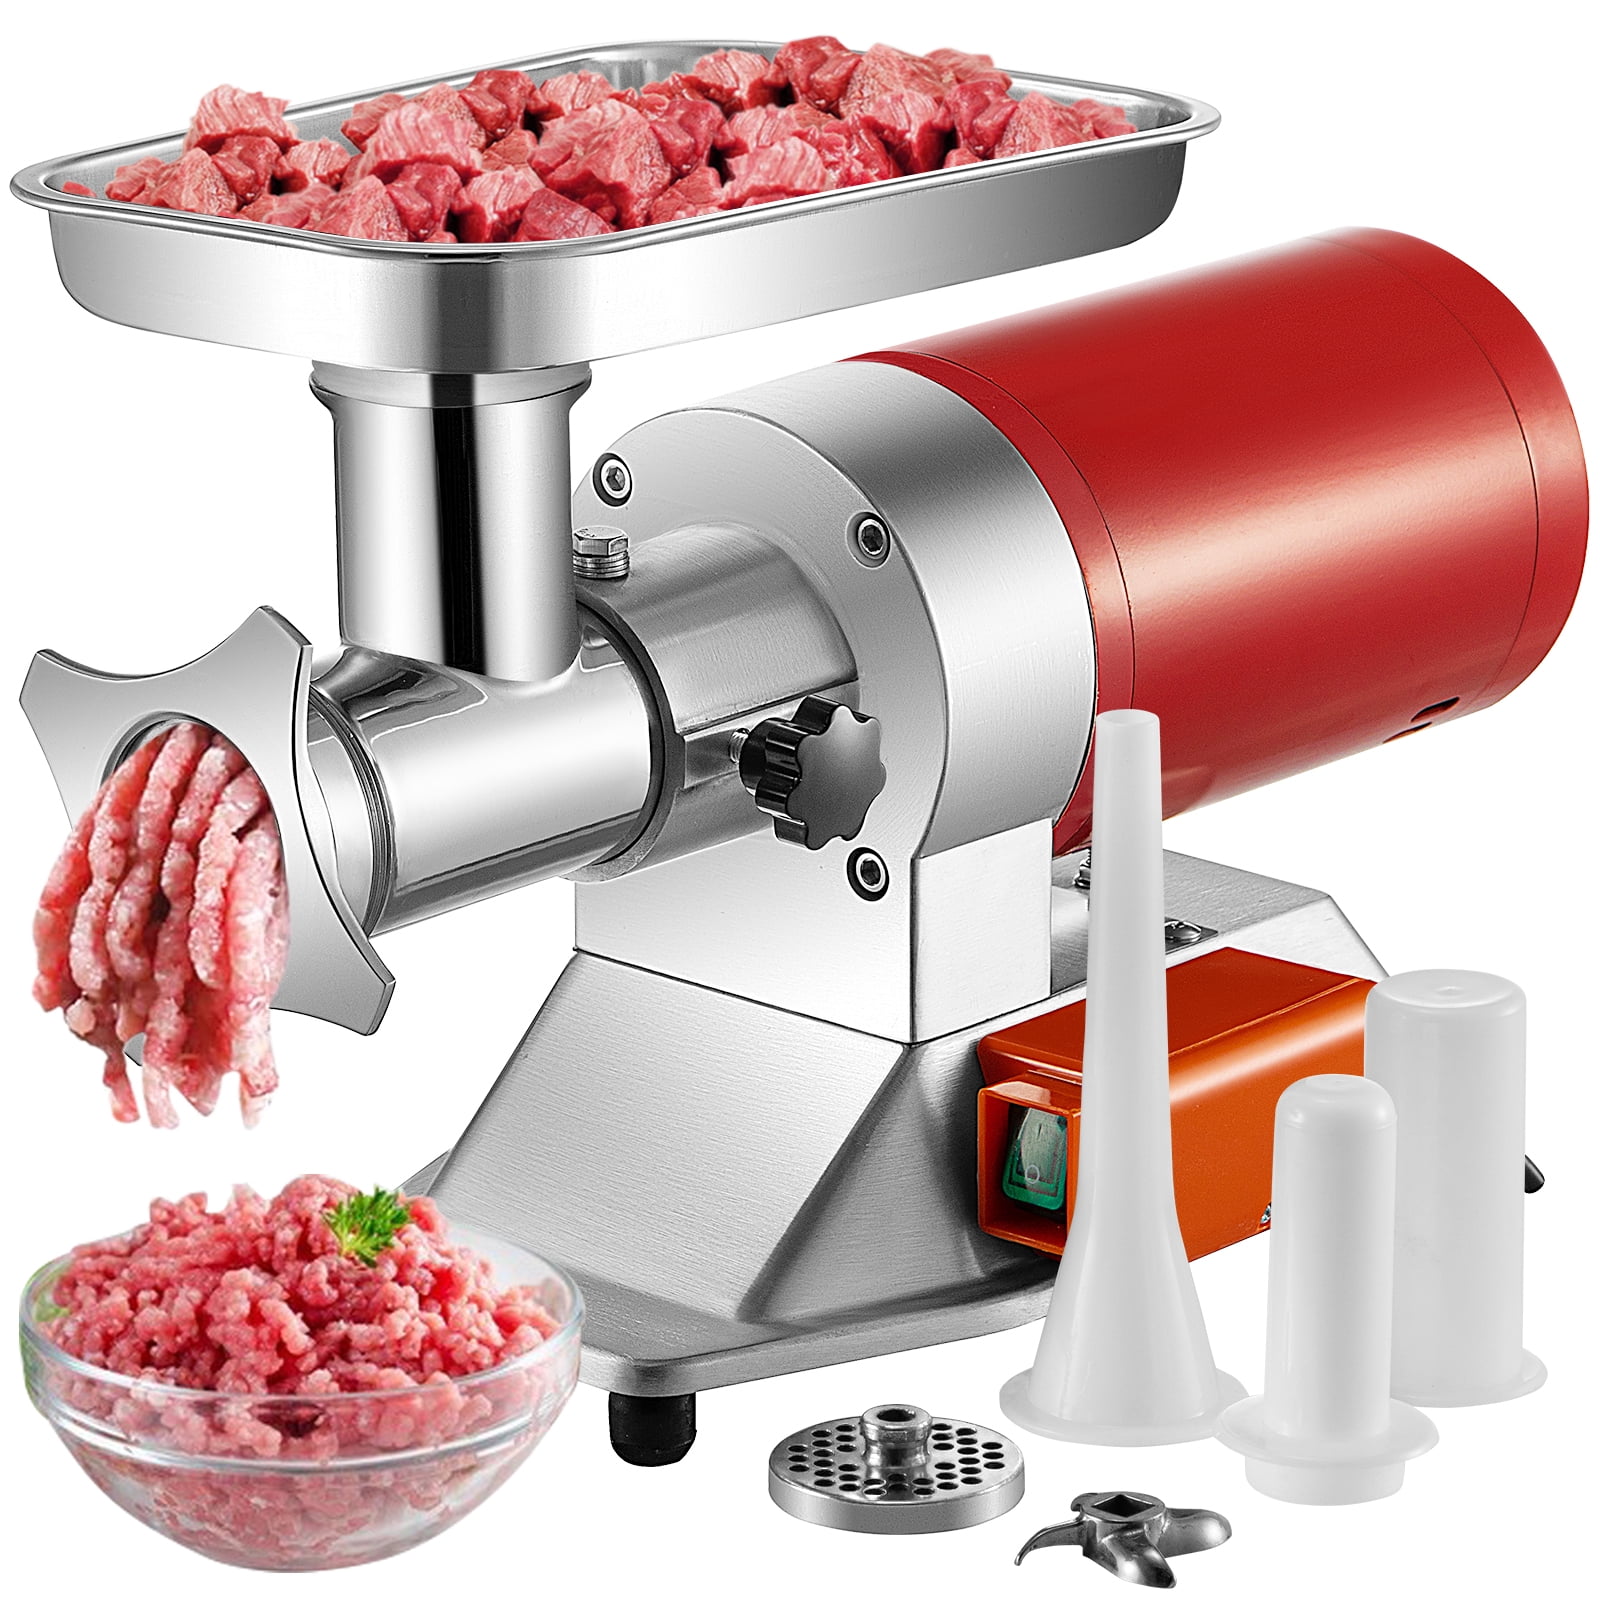 Details about   Heavy Duty Electric Meat Grinder Commercial Stainless Steel with 3 Blades 2000 W 